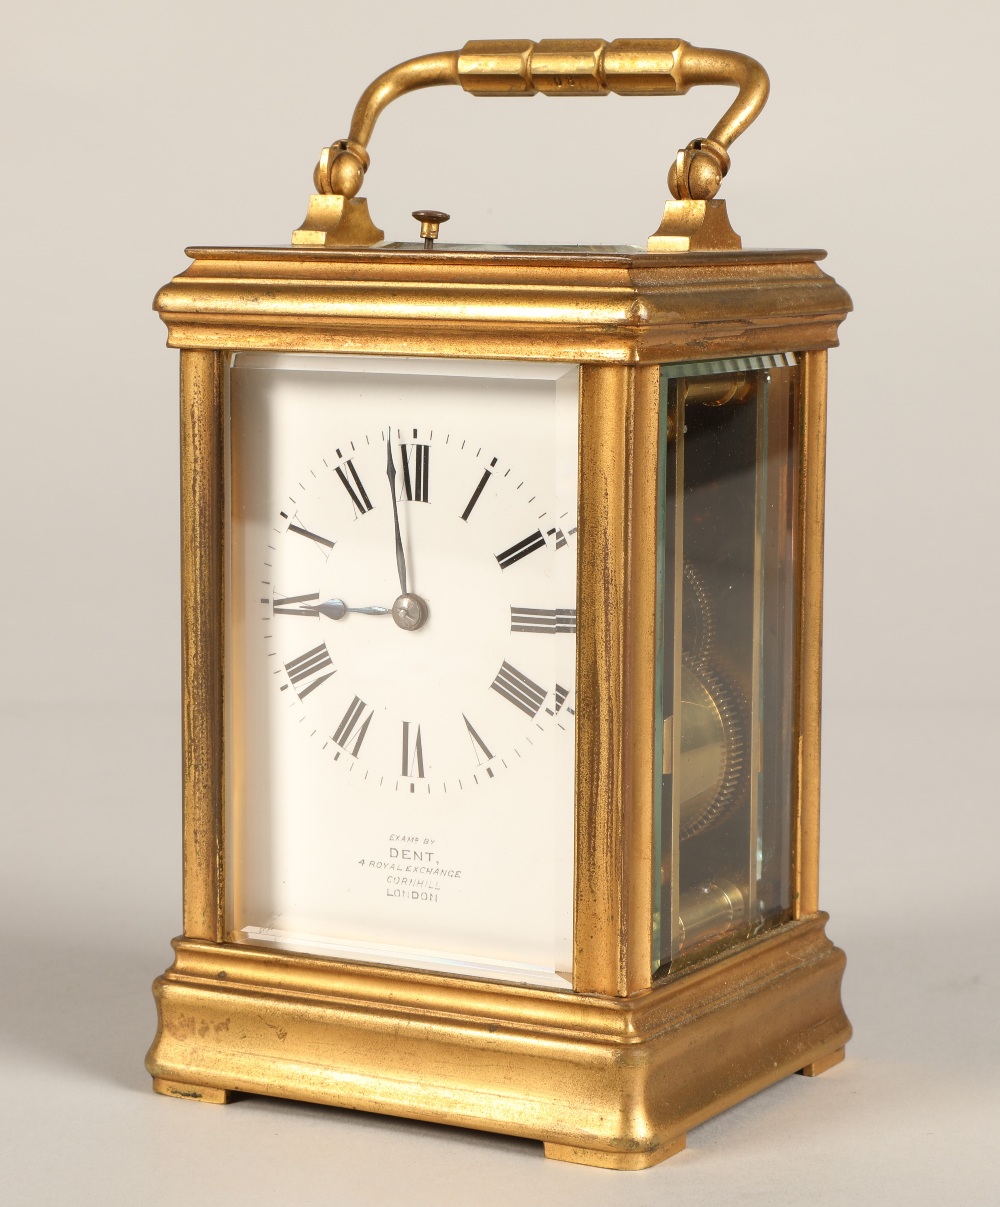 French brass repeating carriage clock, engraved AIGUILLES on the back,  Examp by Dent, 4 Royal - Image 6 of 12